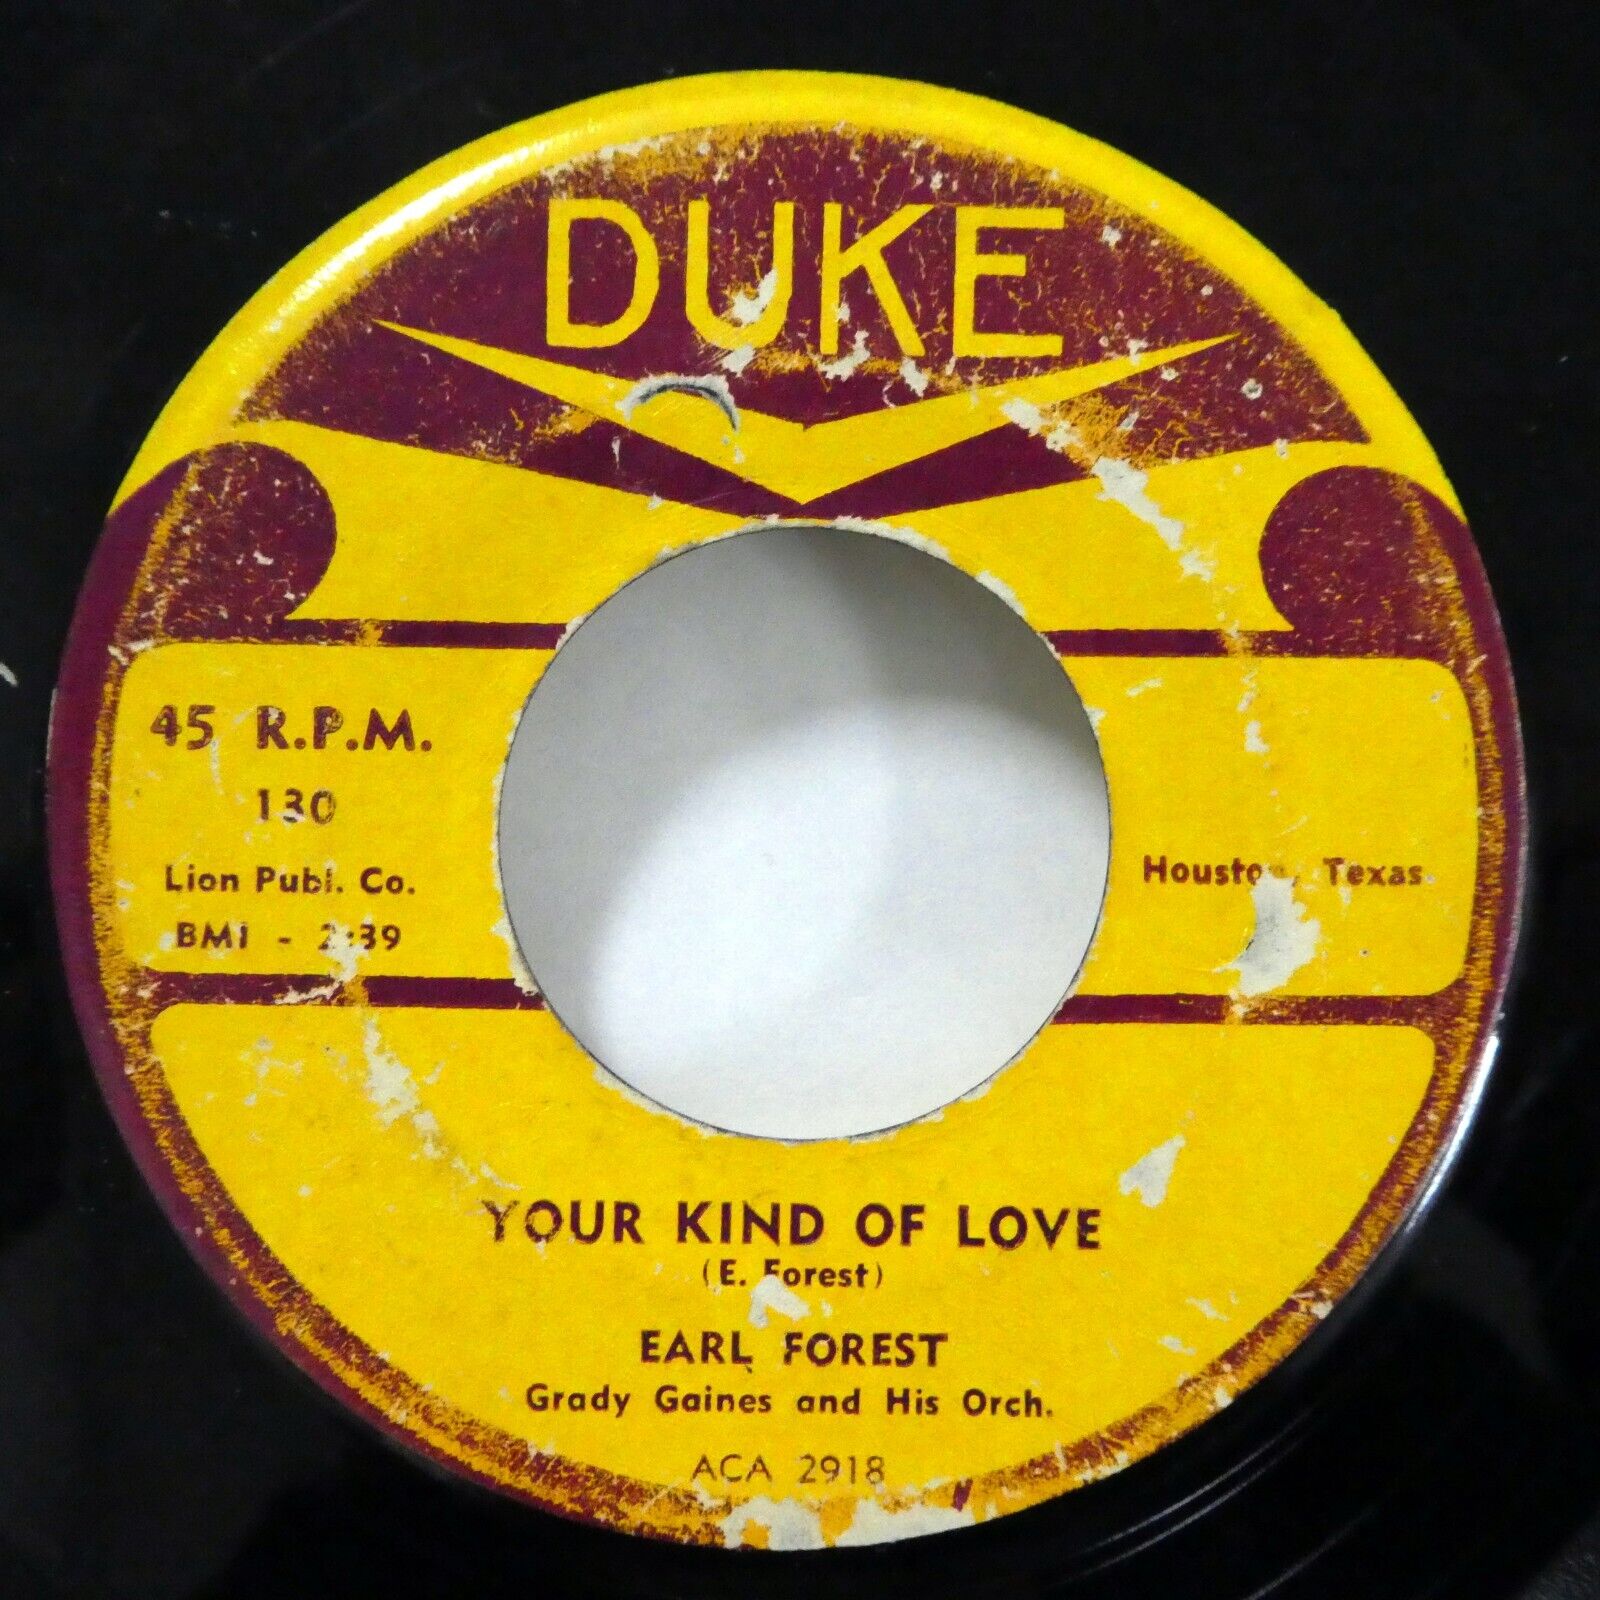 EARL FOREST 45 Ohh Ohh Wee Your Kind of Love DUKE Original press Blues  Sw 143